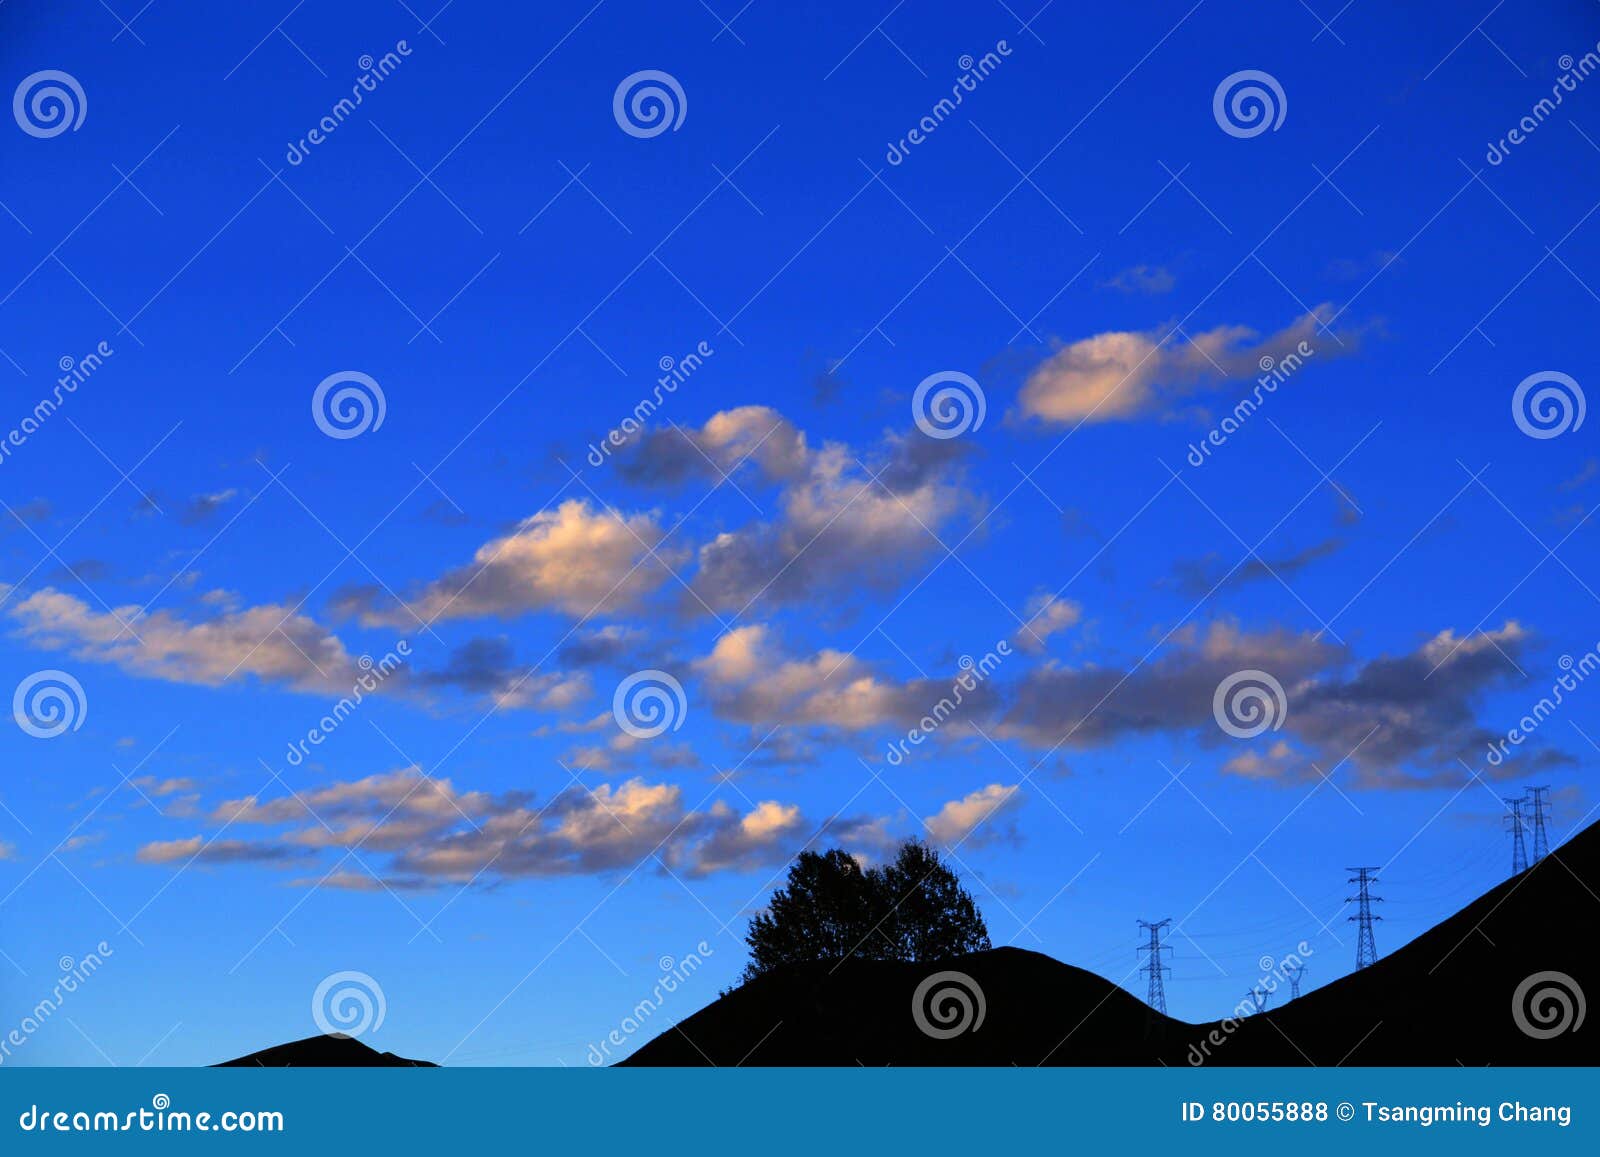 blue sky with peacefull cotton clouds in qinghai tibet plateau